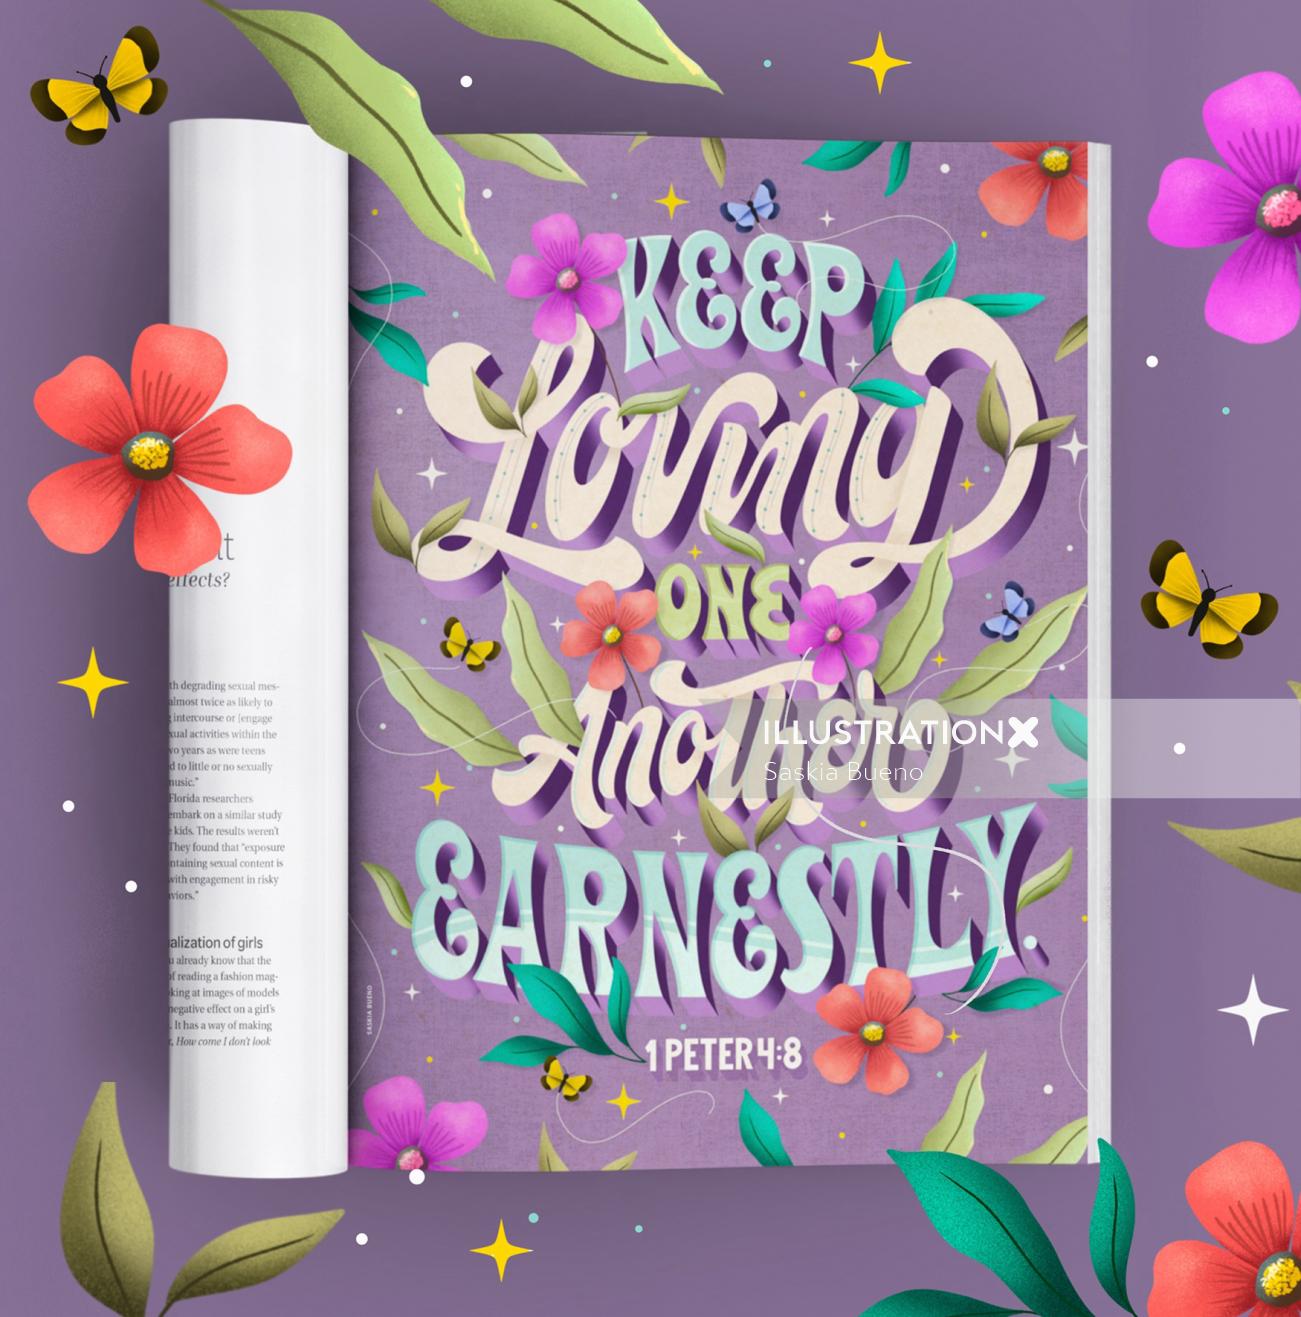 Lettering Keep Loving One Another Earnestly